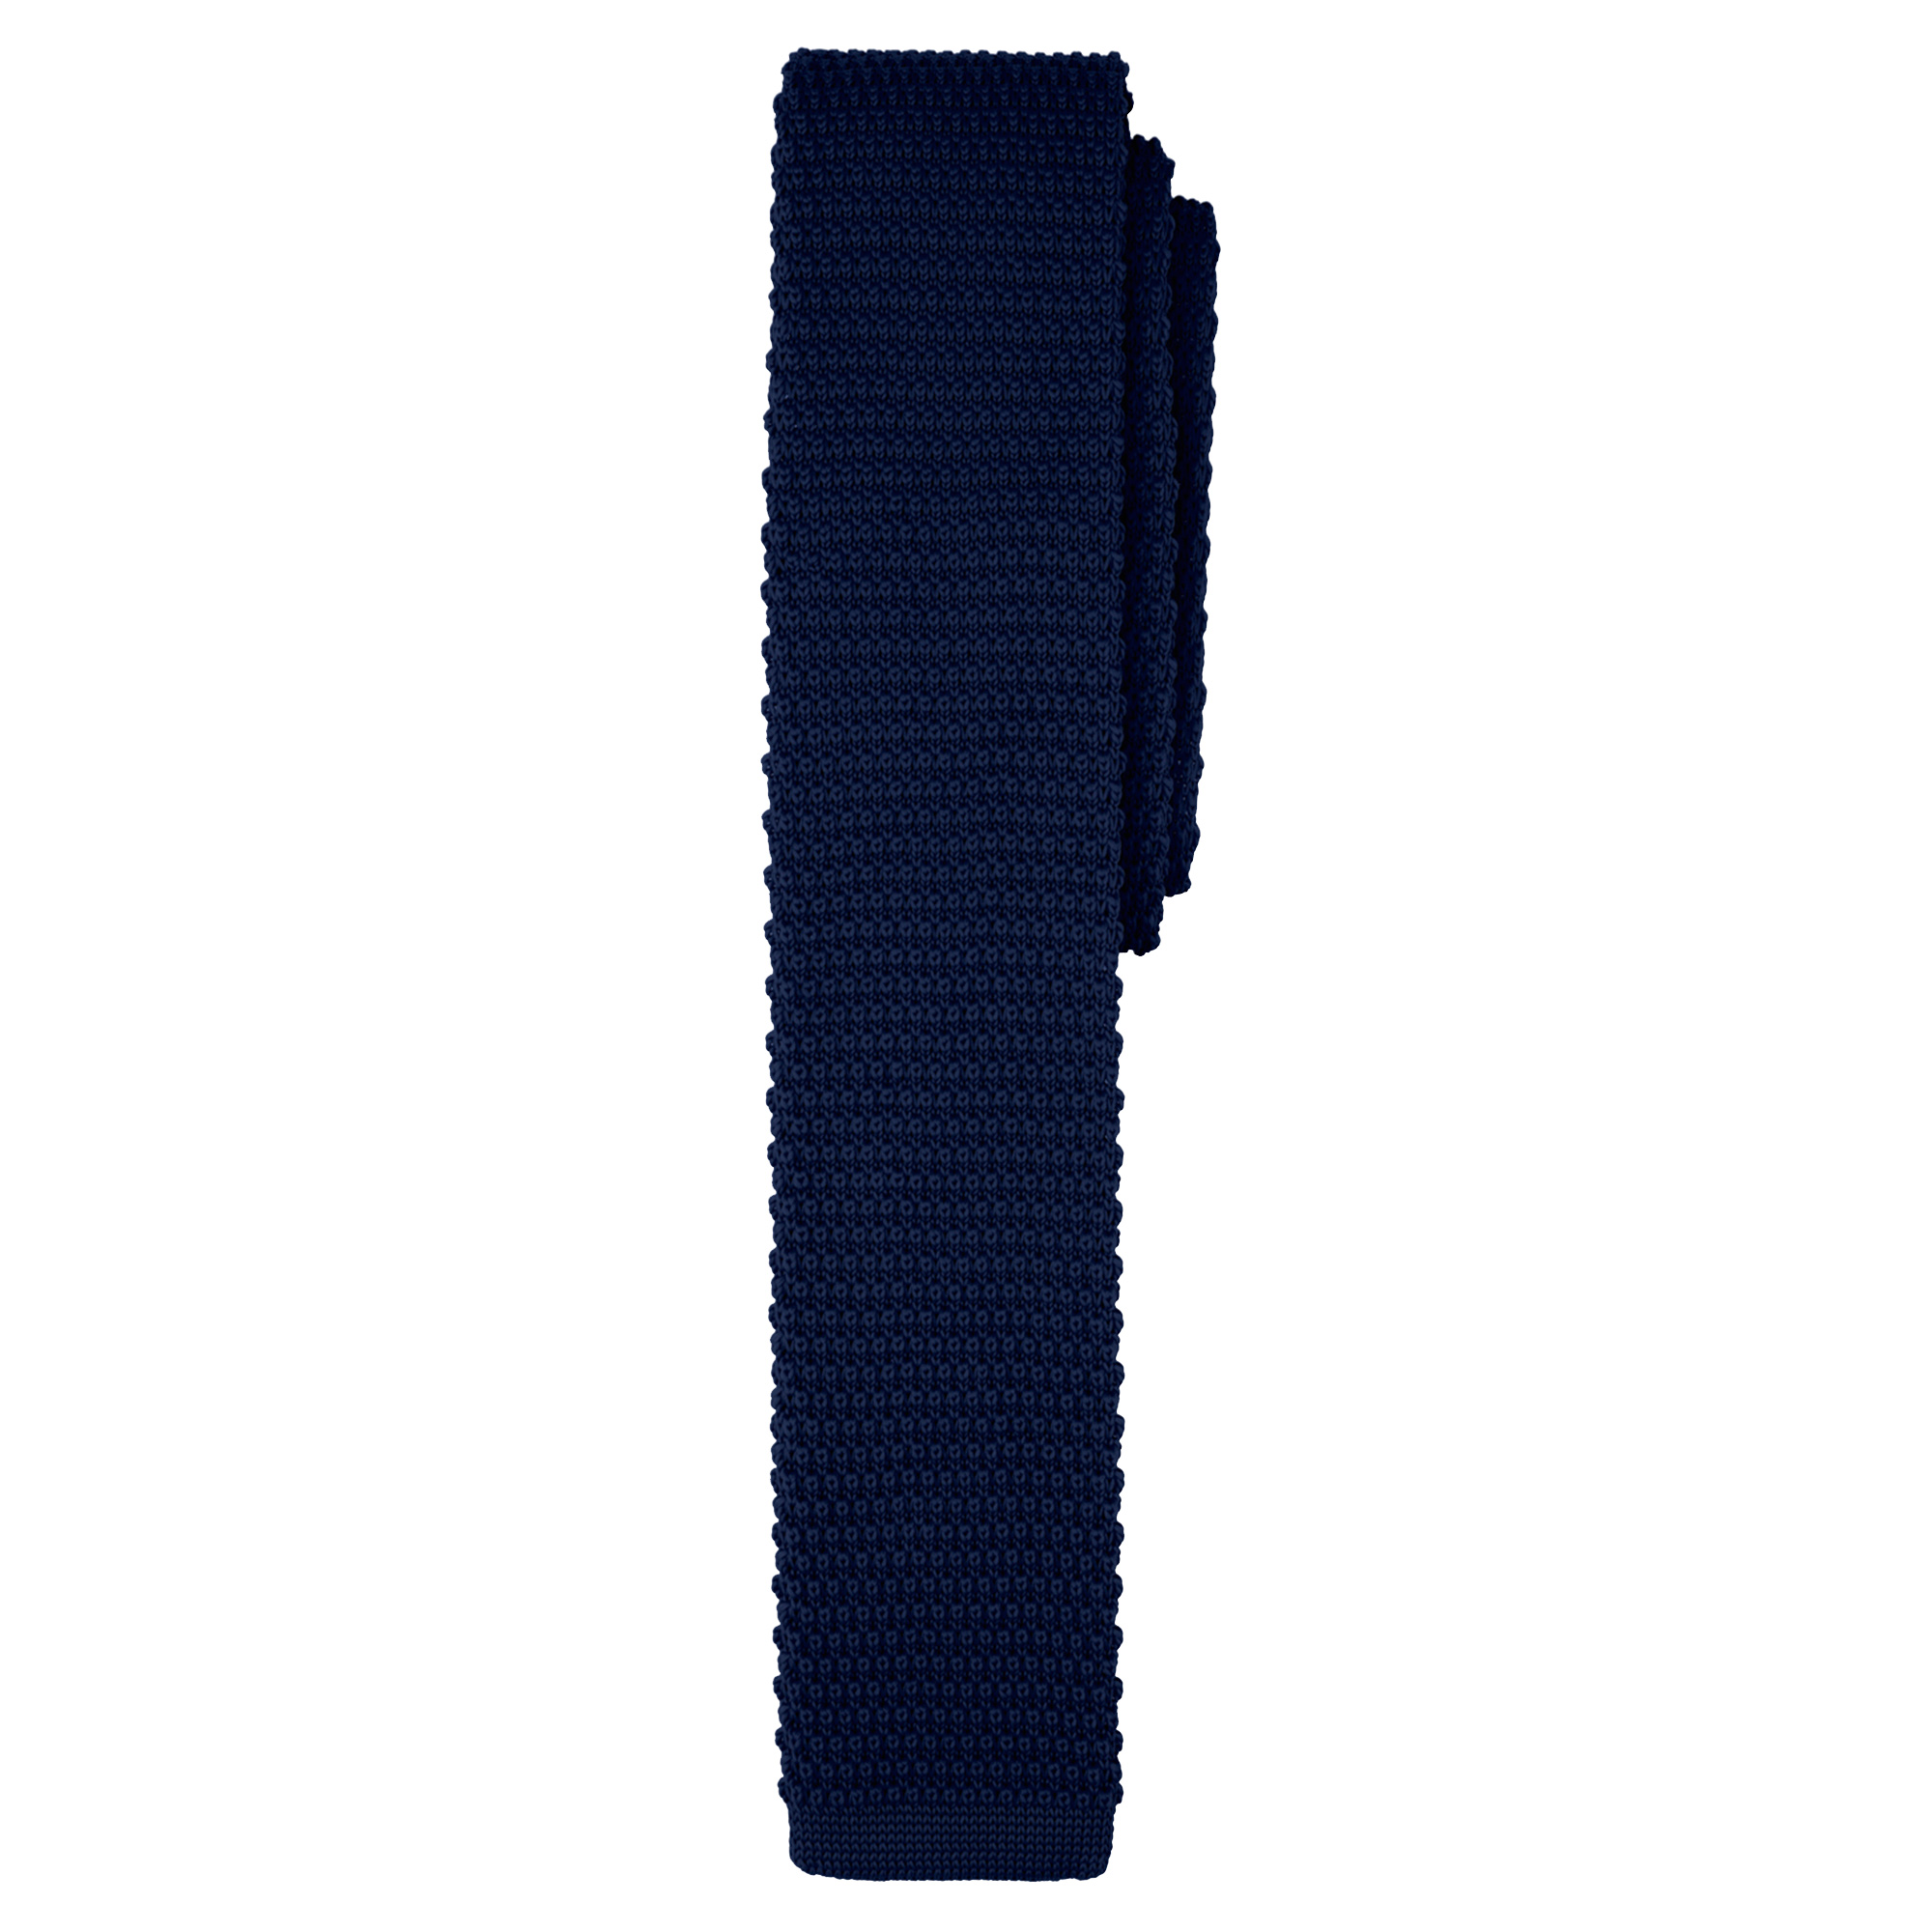 Men's Solid Color Knitted 2.5 inch Width Slim Neck Tie - Navy Blue